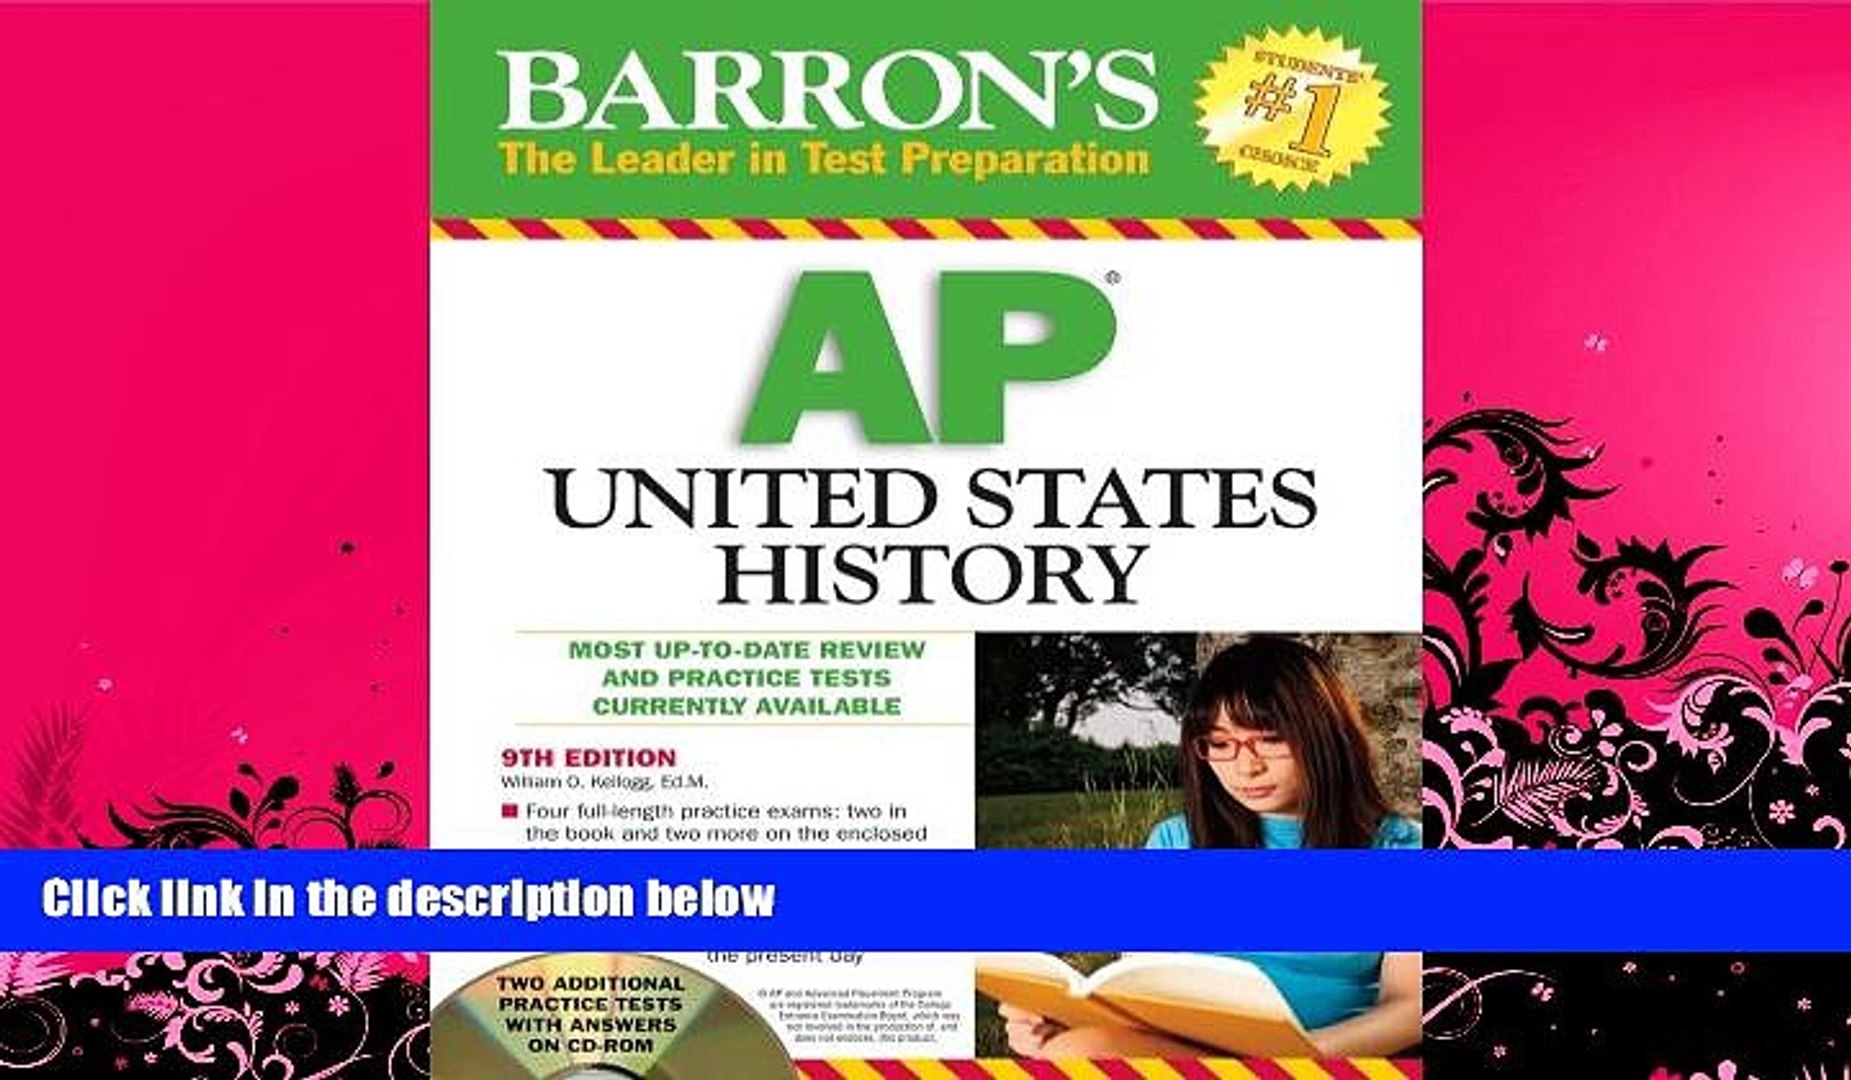 Barron's AP United States History with CD-ROM is a great book to get started in American history. It